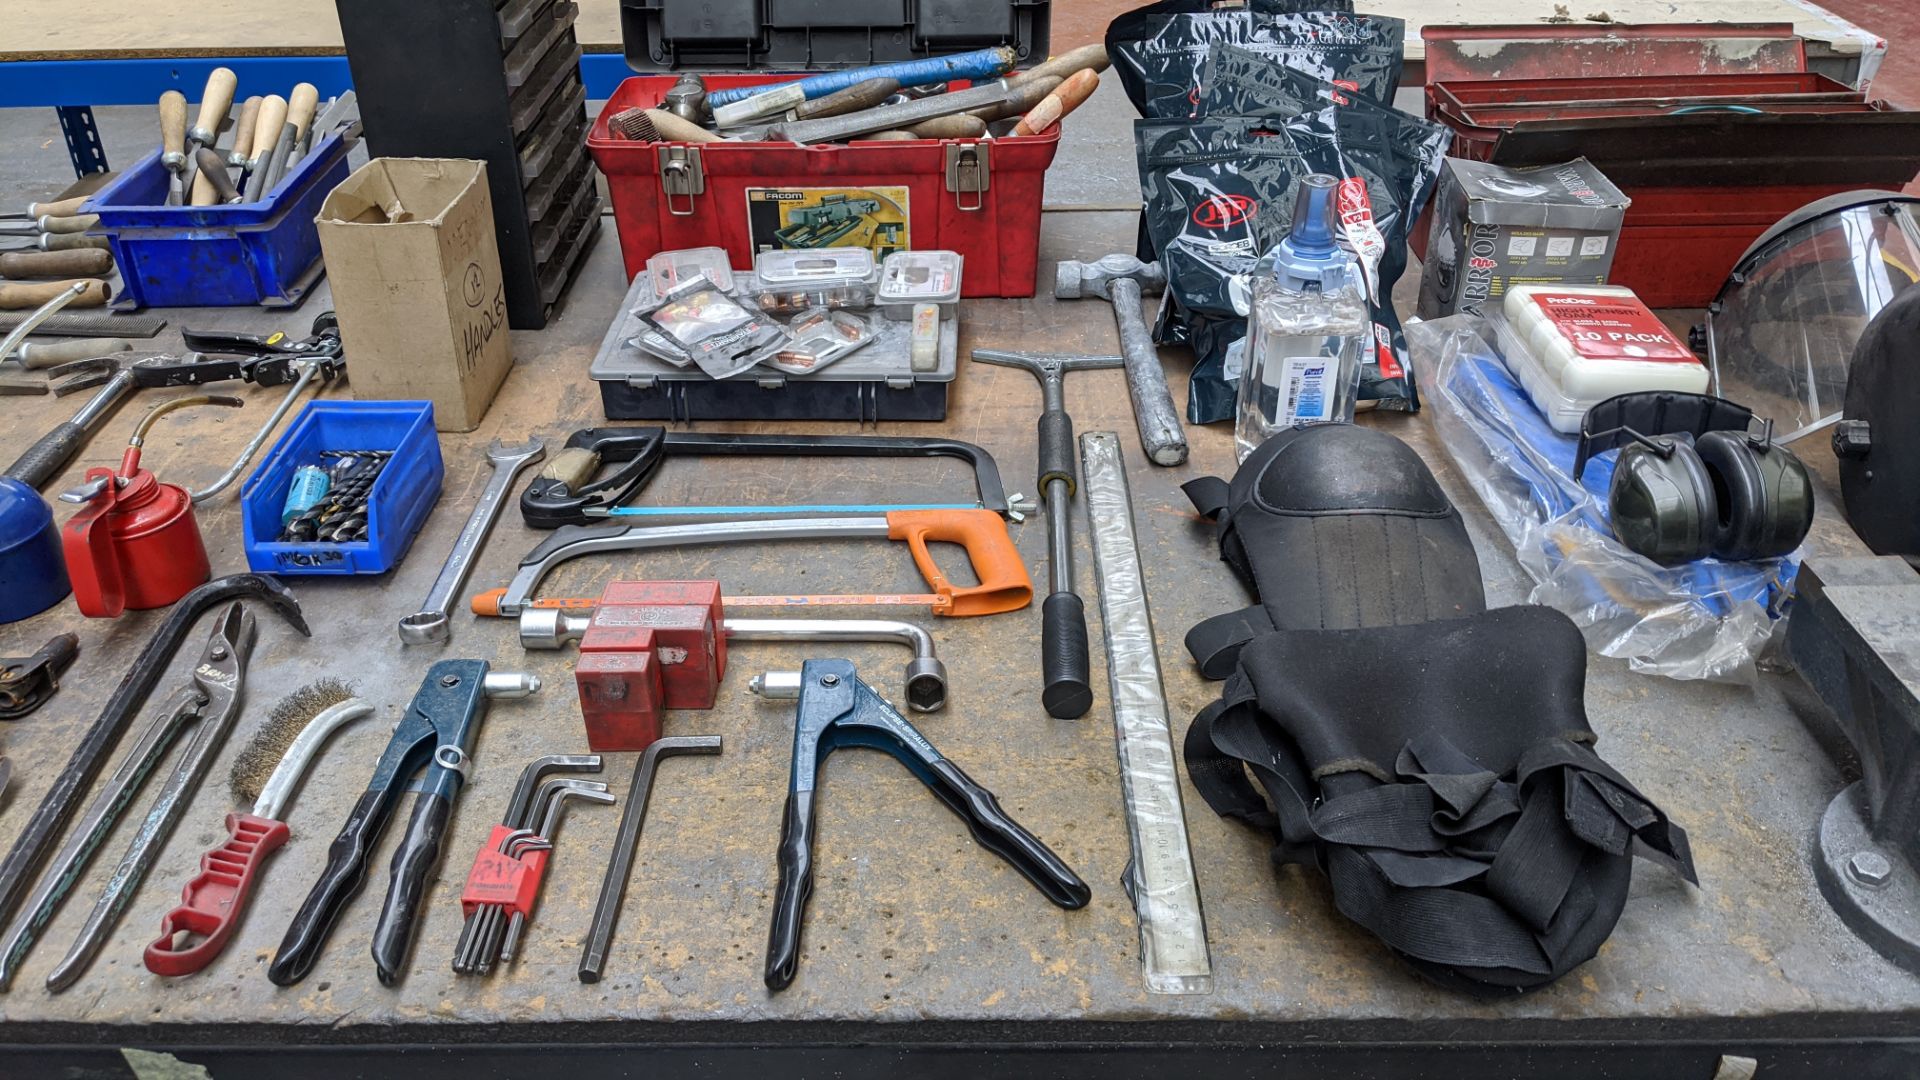 Bench & contents including vice, hand tools, riveting equipment, face masks & other PPE, chisels & - Image 4 of 12